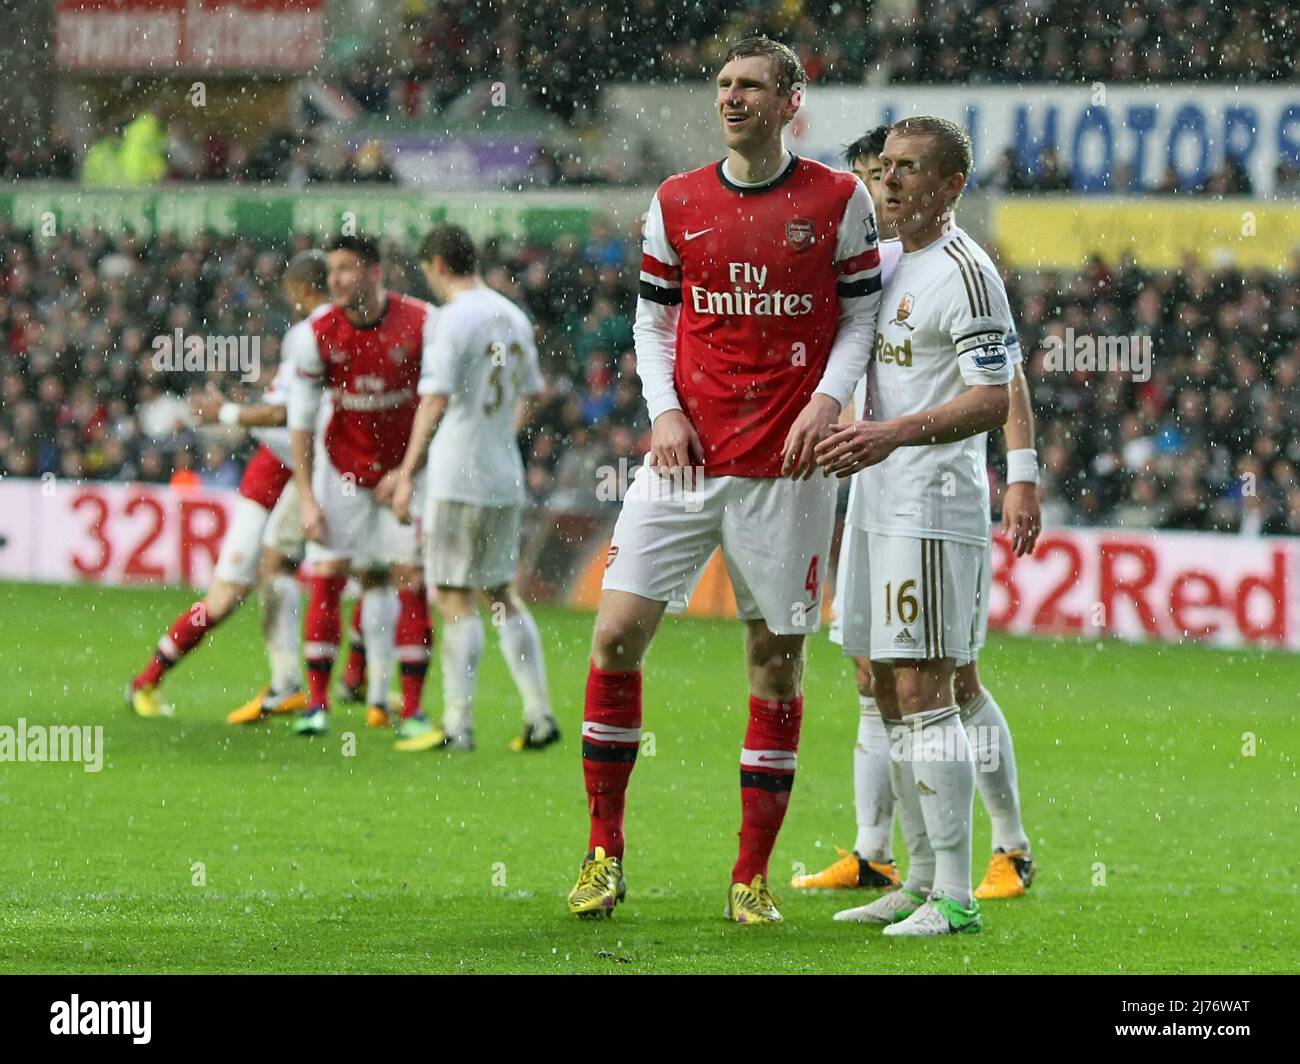 16 March 2013  - Soccer - Barclays Premiership Football - Swansea City Vs. Arsenal -  Per Mertesacker of Arsenal stands with Garry Monk of Swansea City in the rain. - Photo: Paul Roberts / Pathos. Stock Photo